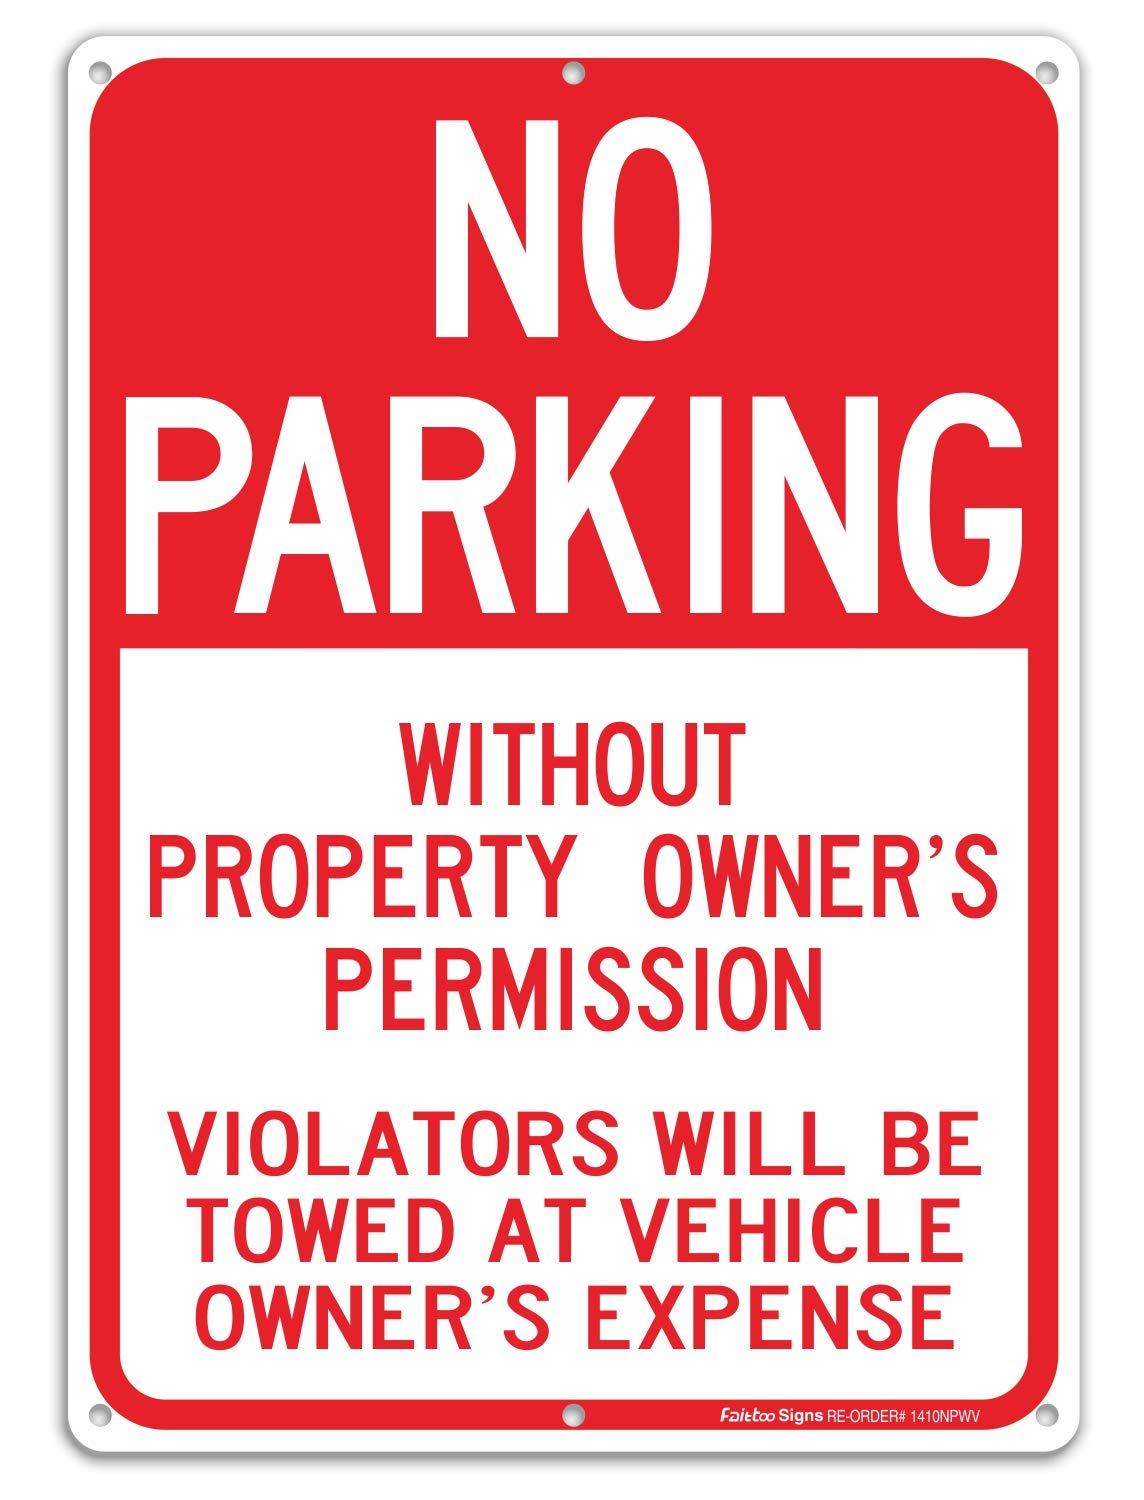 No Parking Without Property Owner's Permission, Violators Will Be Towed at Vehicle Owner's Expense Sign, Reflective .40 Rust Free Aluminum 14 x 10, UV Protected, Weather Resistant, Waterproof, Durable